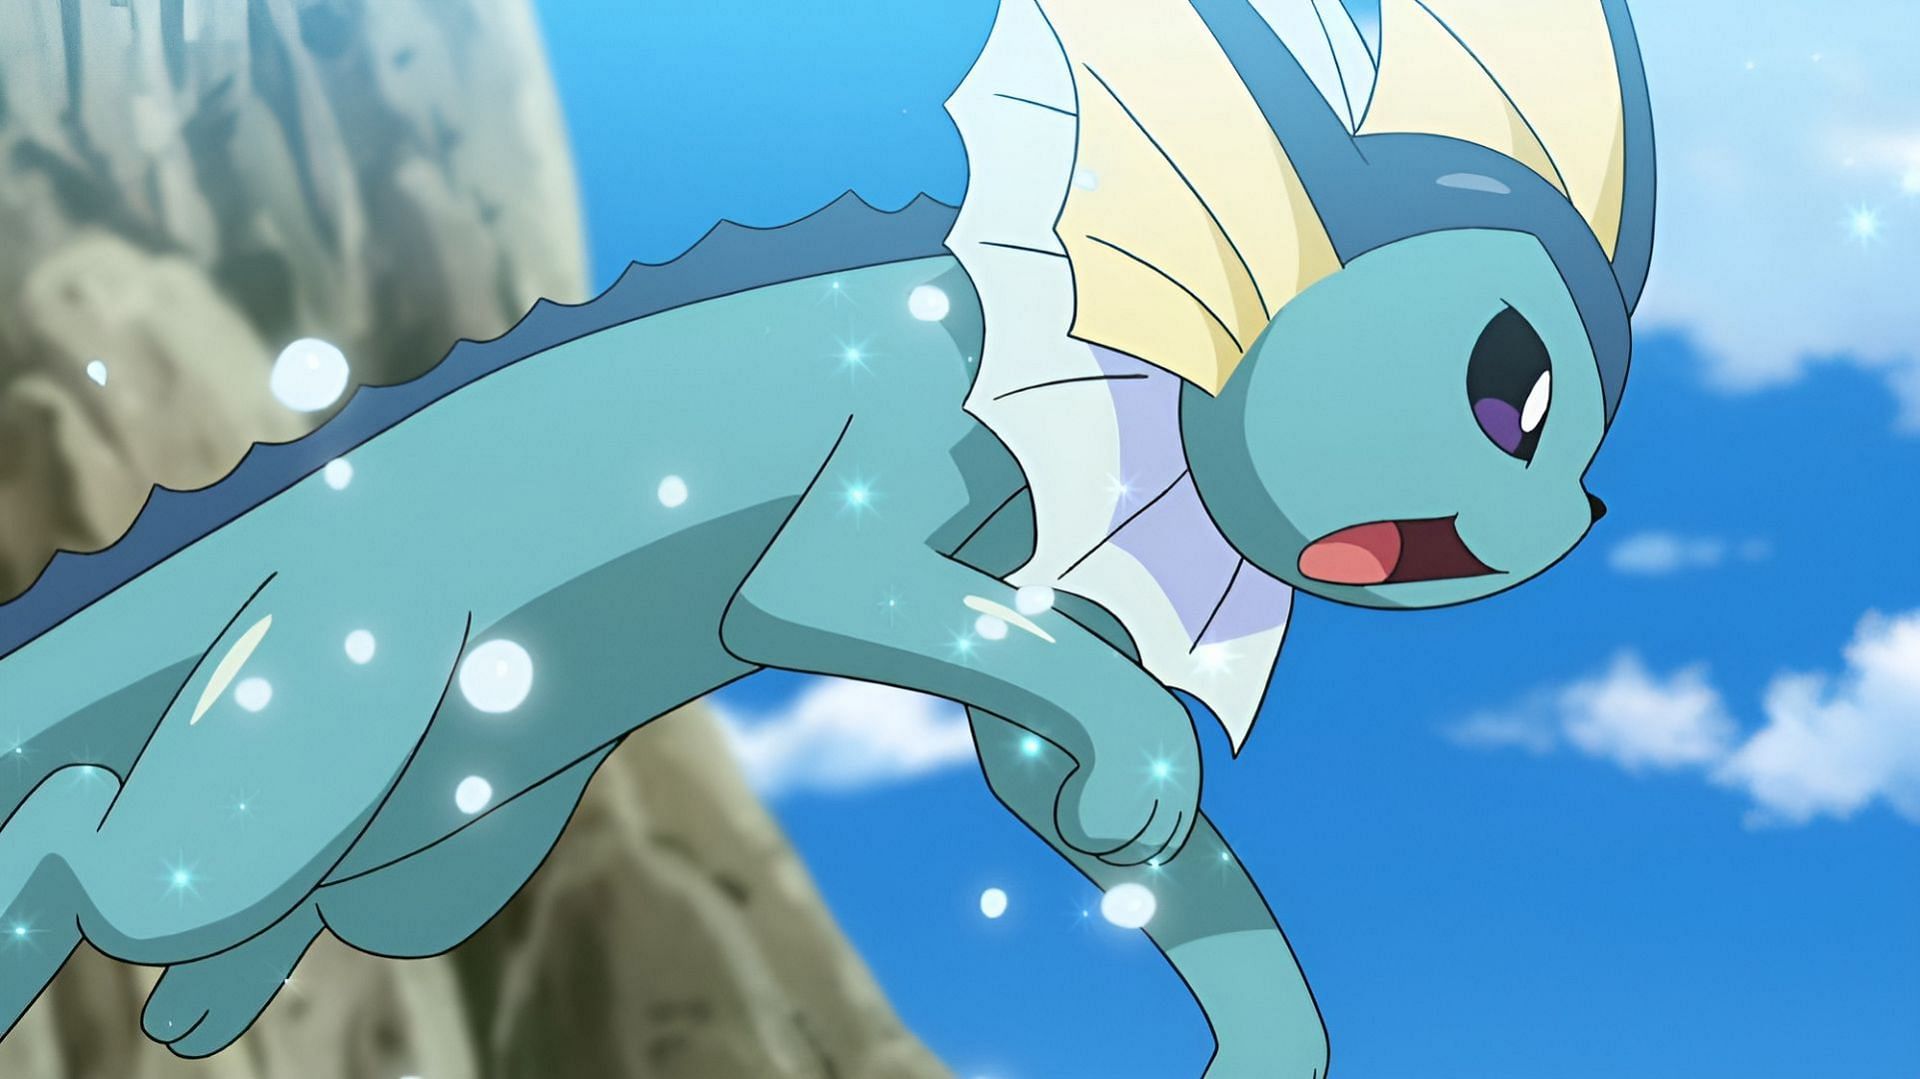 Vaporeon is the Pokedle Classic answer for April 12 (Image via The Pokemon Company)